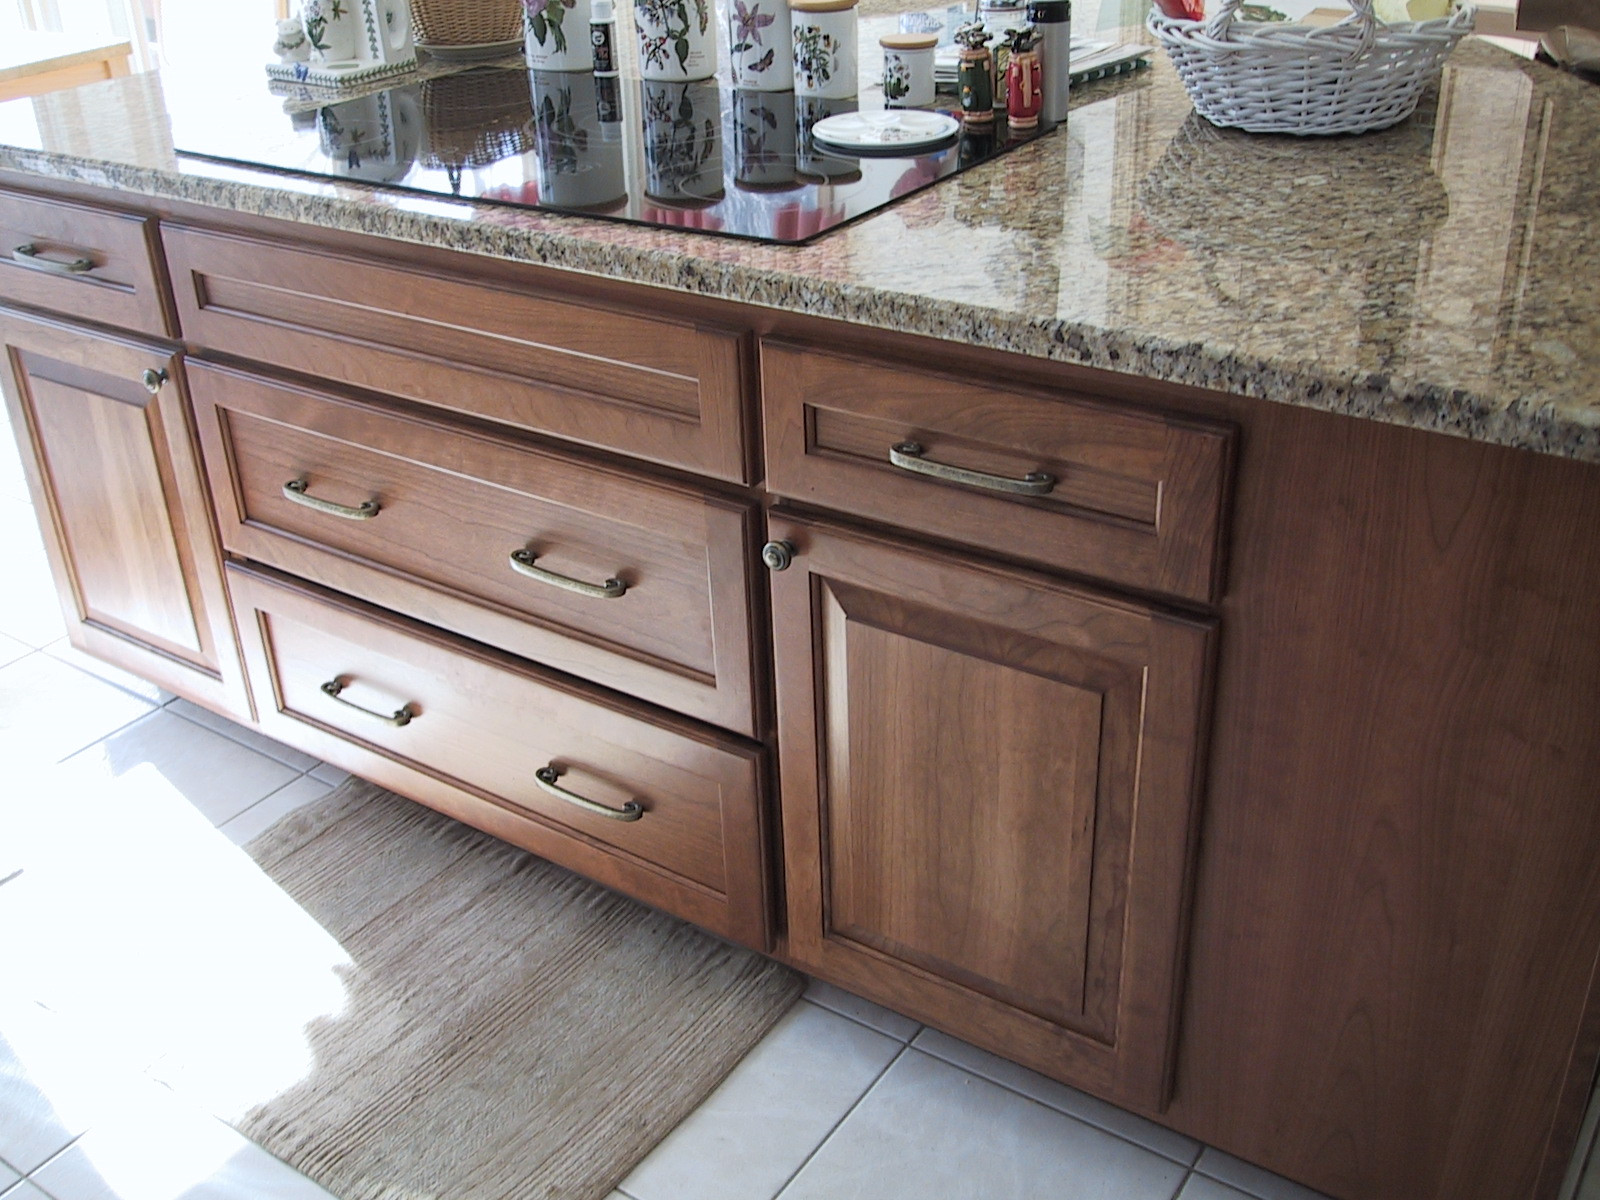 Replace Kitchen Countertop
 replace cabinets keep countertops possible